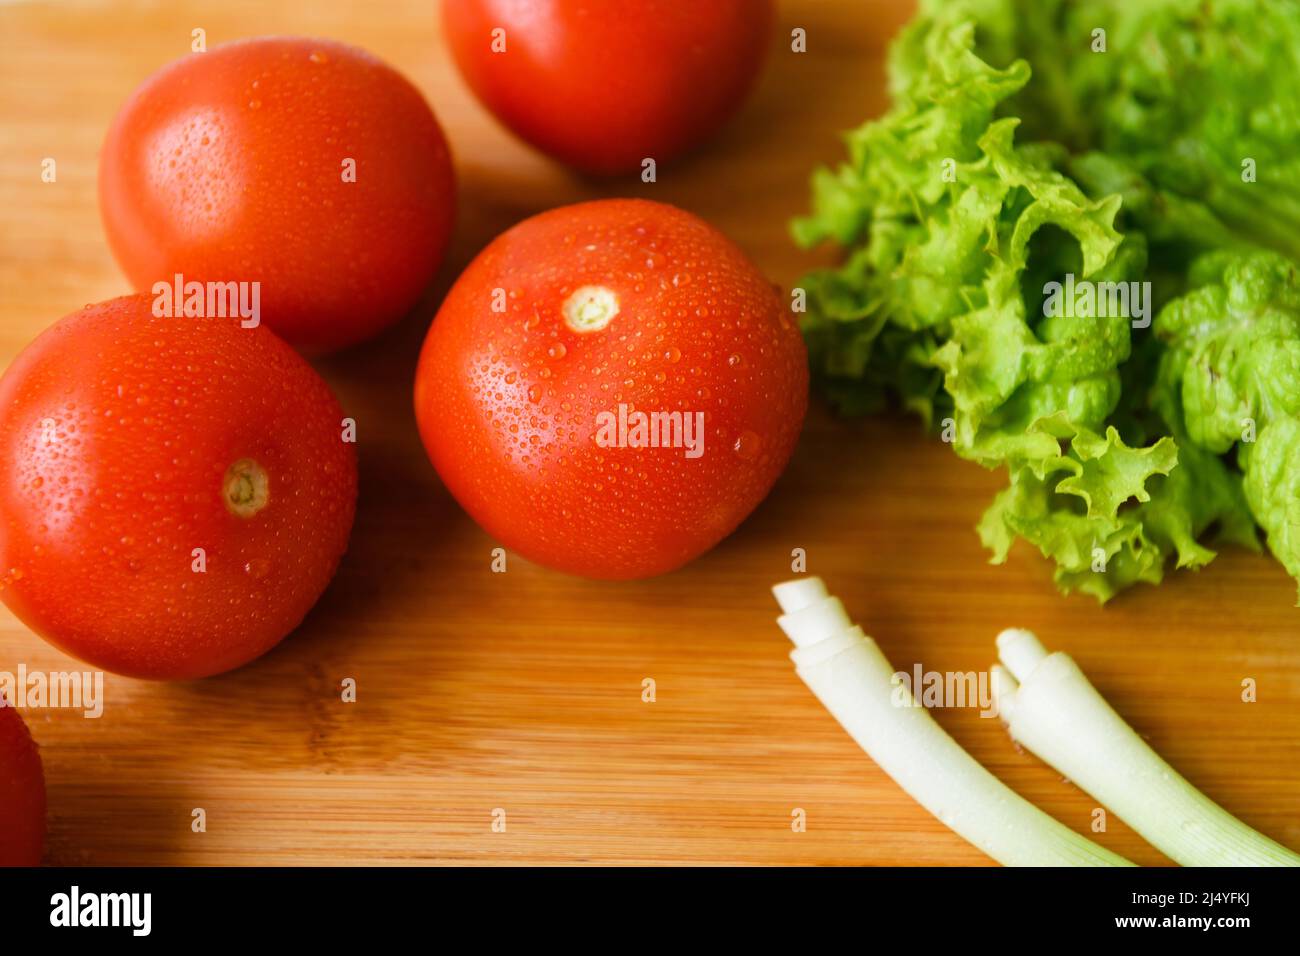 Fresh vegetables for salad lie on a wooden table with a cutting board. Top view. Stock Photo